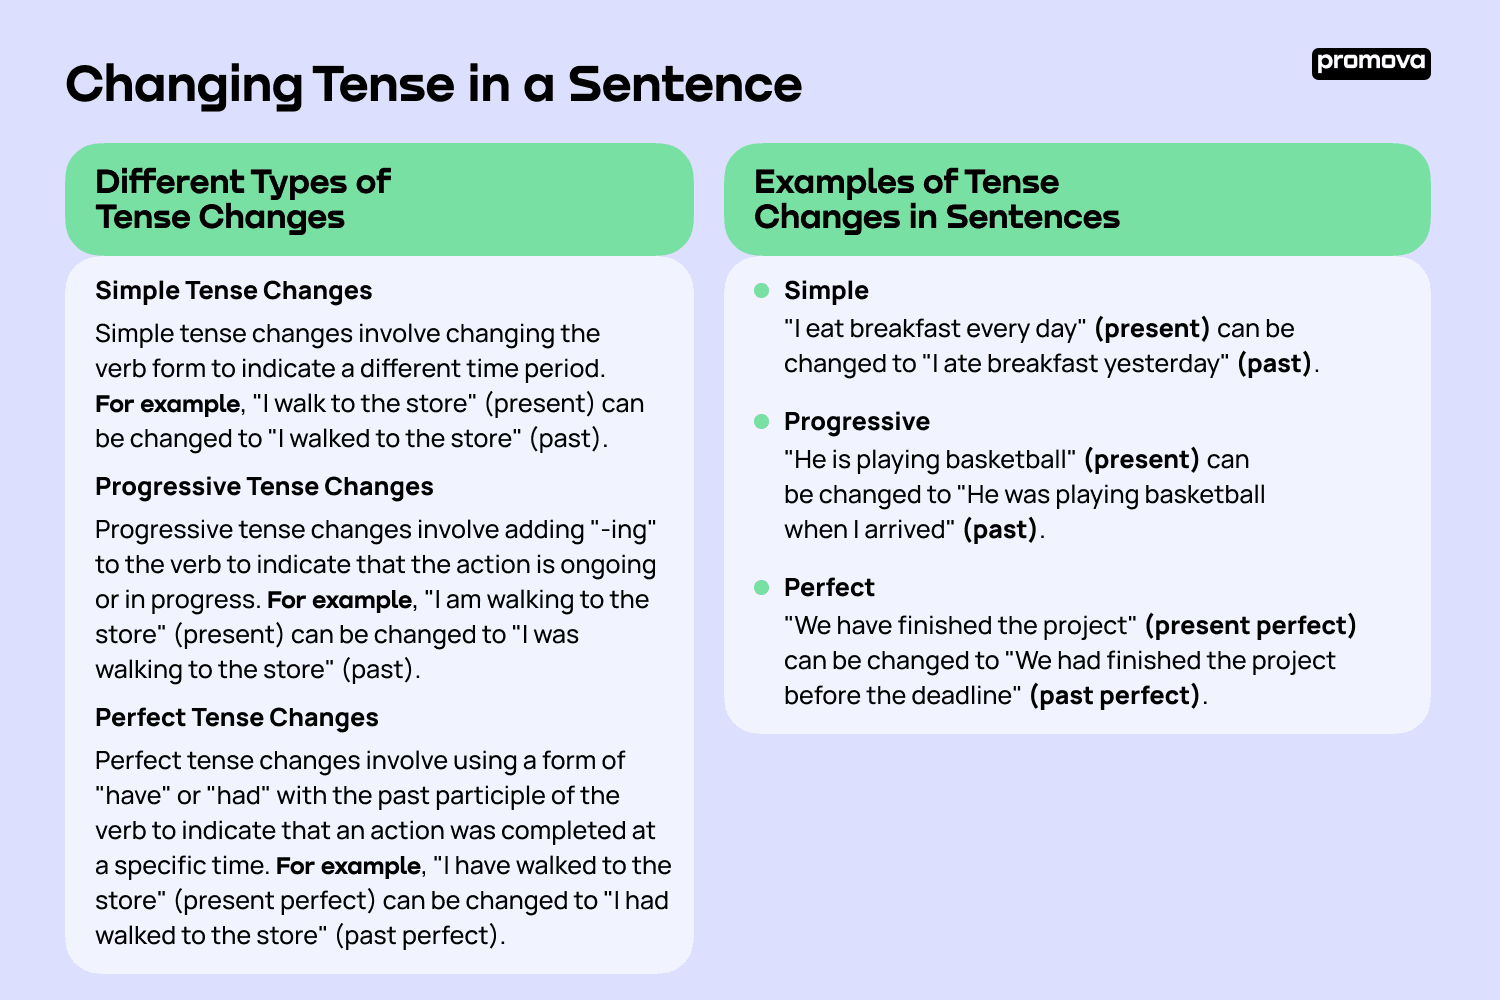 Different Types of Tense Changes